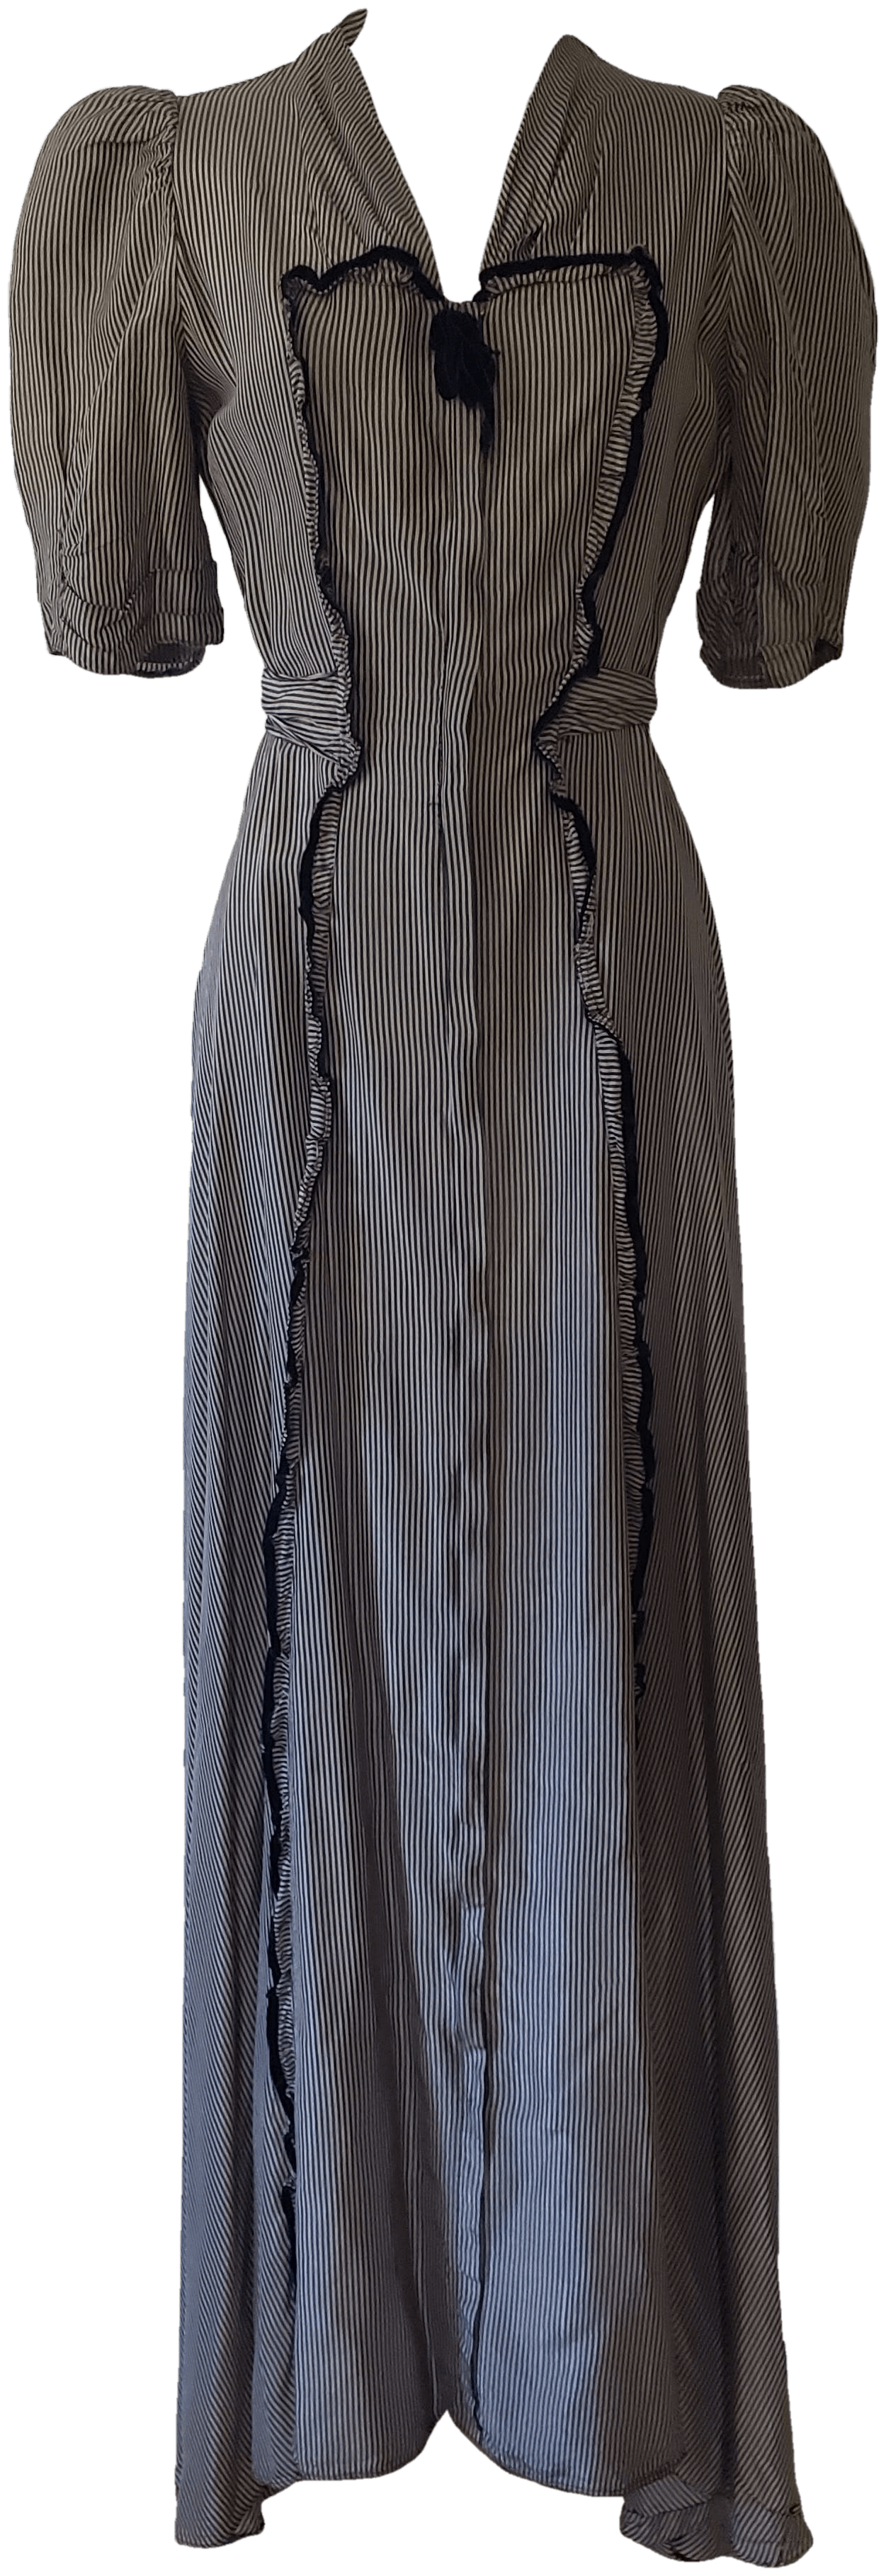 grey and white striped maxi dress